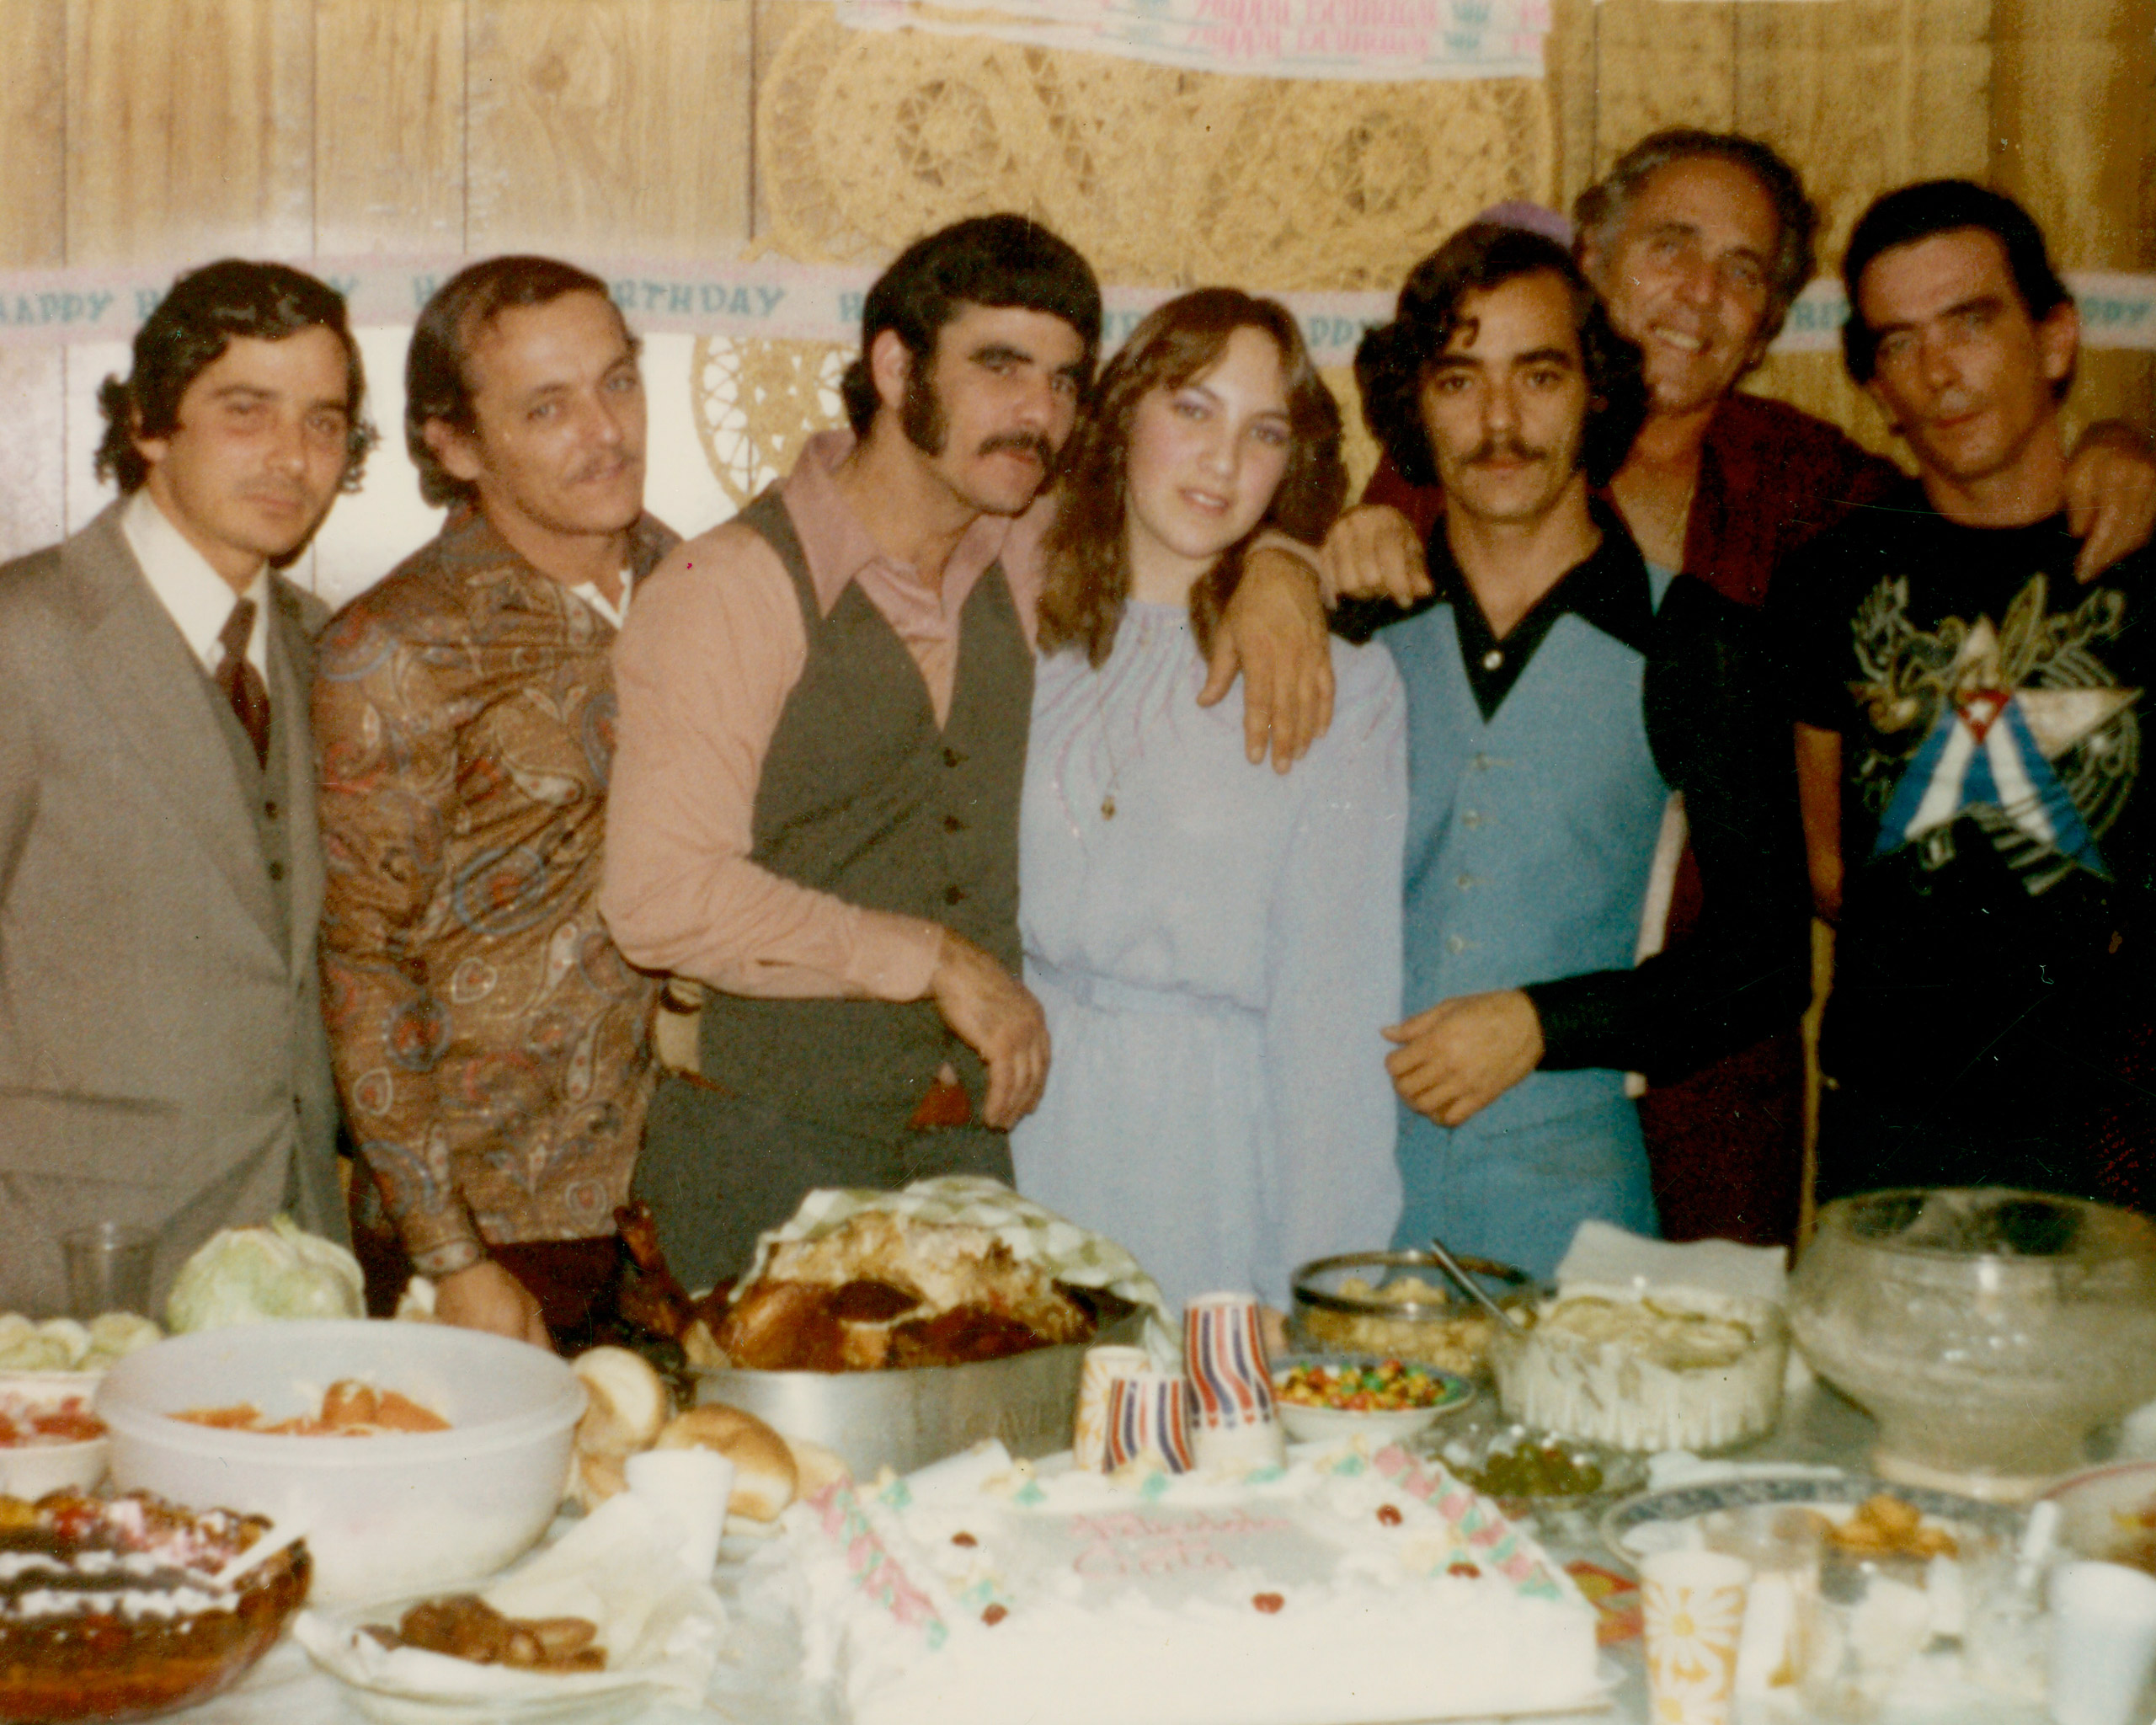 From left to right, unknown, Juanito, Silvio, Cira (Sira Gonzalez's daughter), Jorge, Manuel Gonzalez, Pepe. The family reunited frequently for birthday parties and holidays at the London Street house.